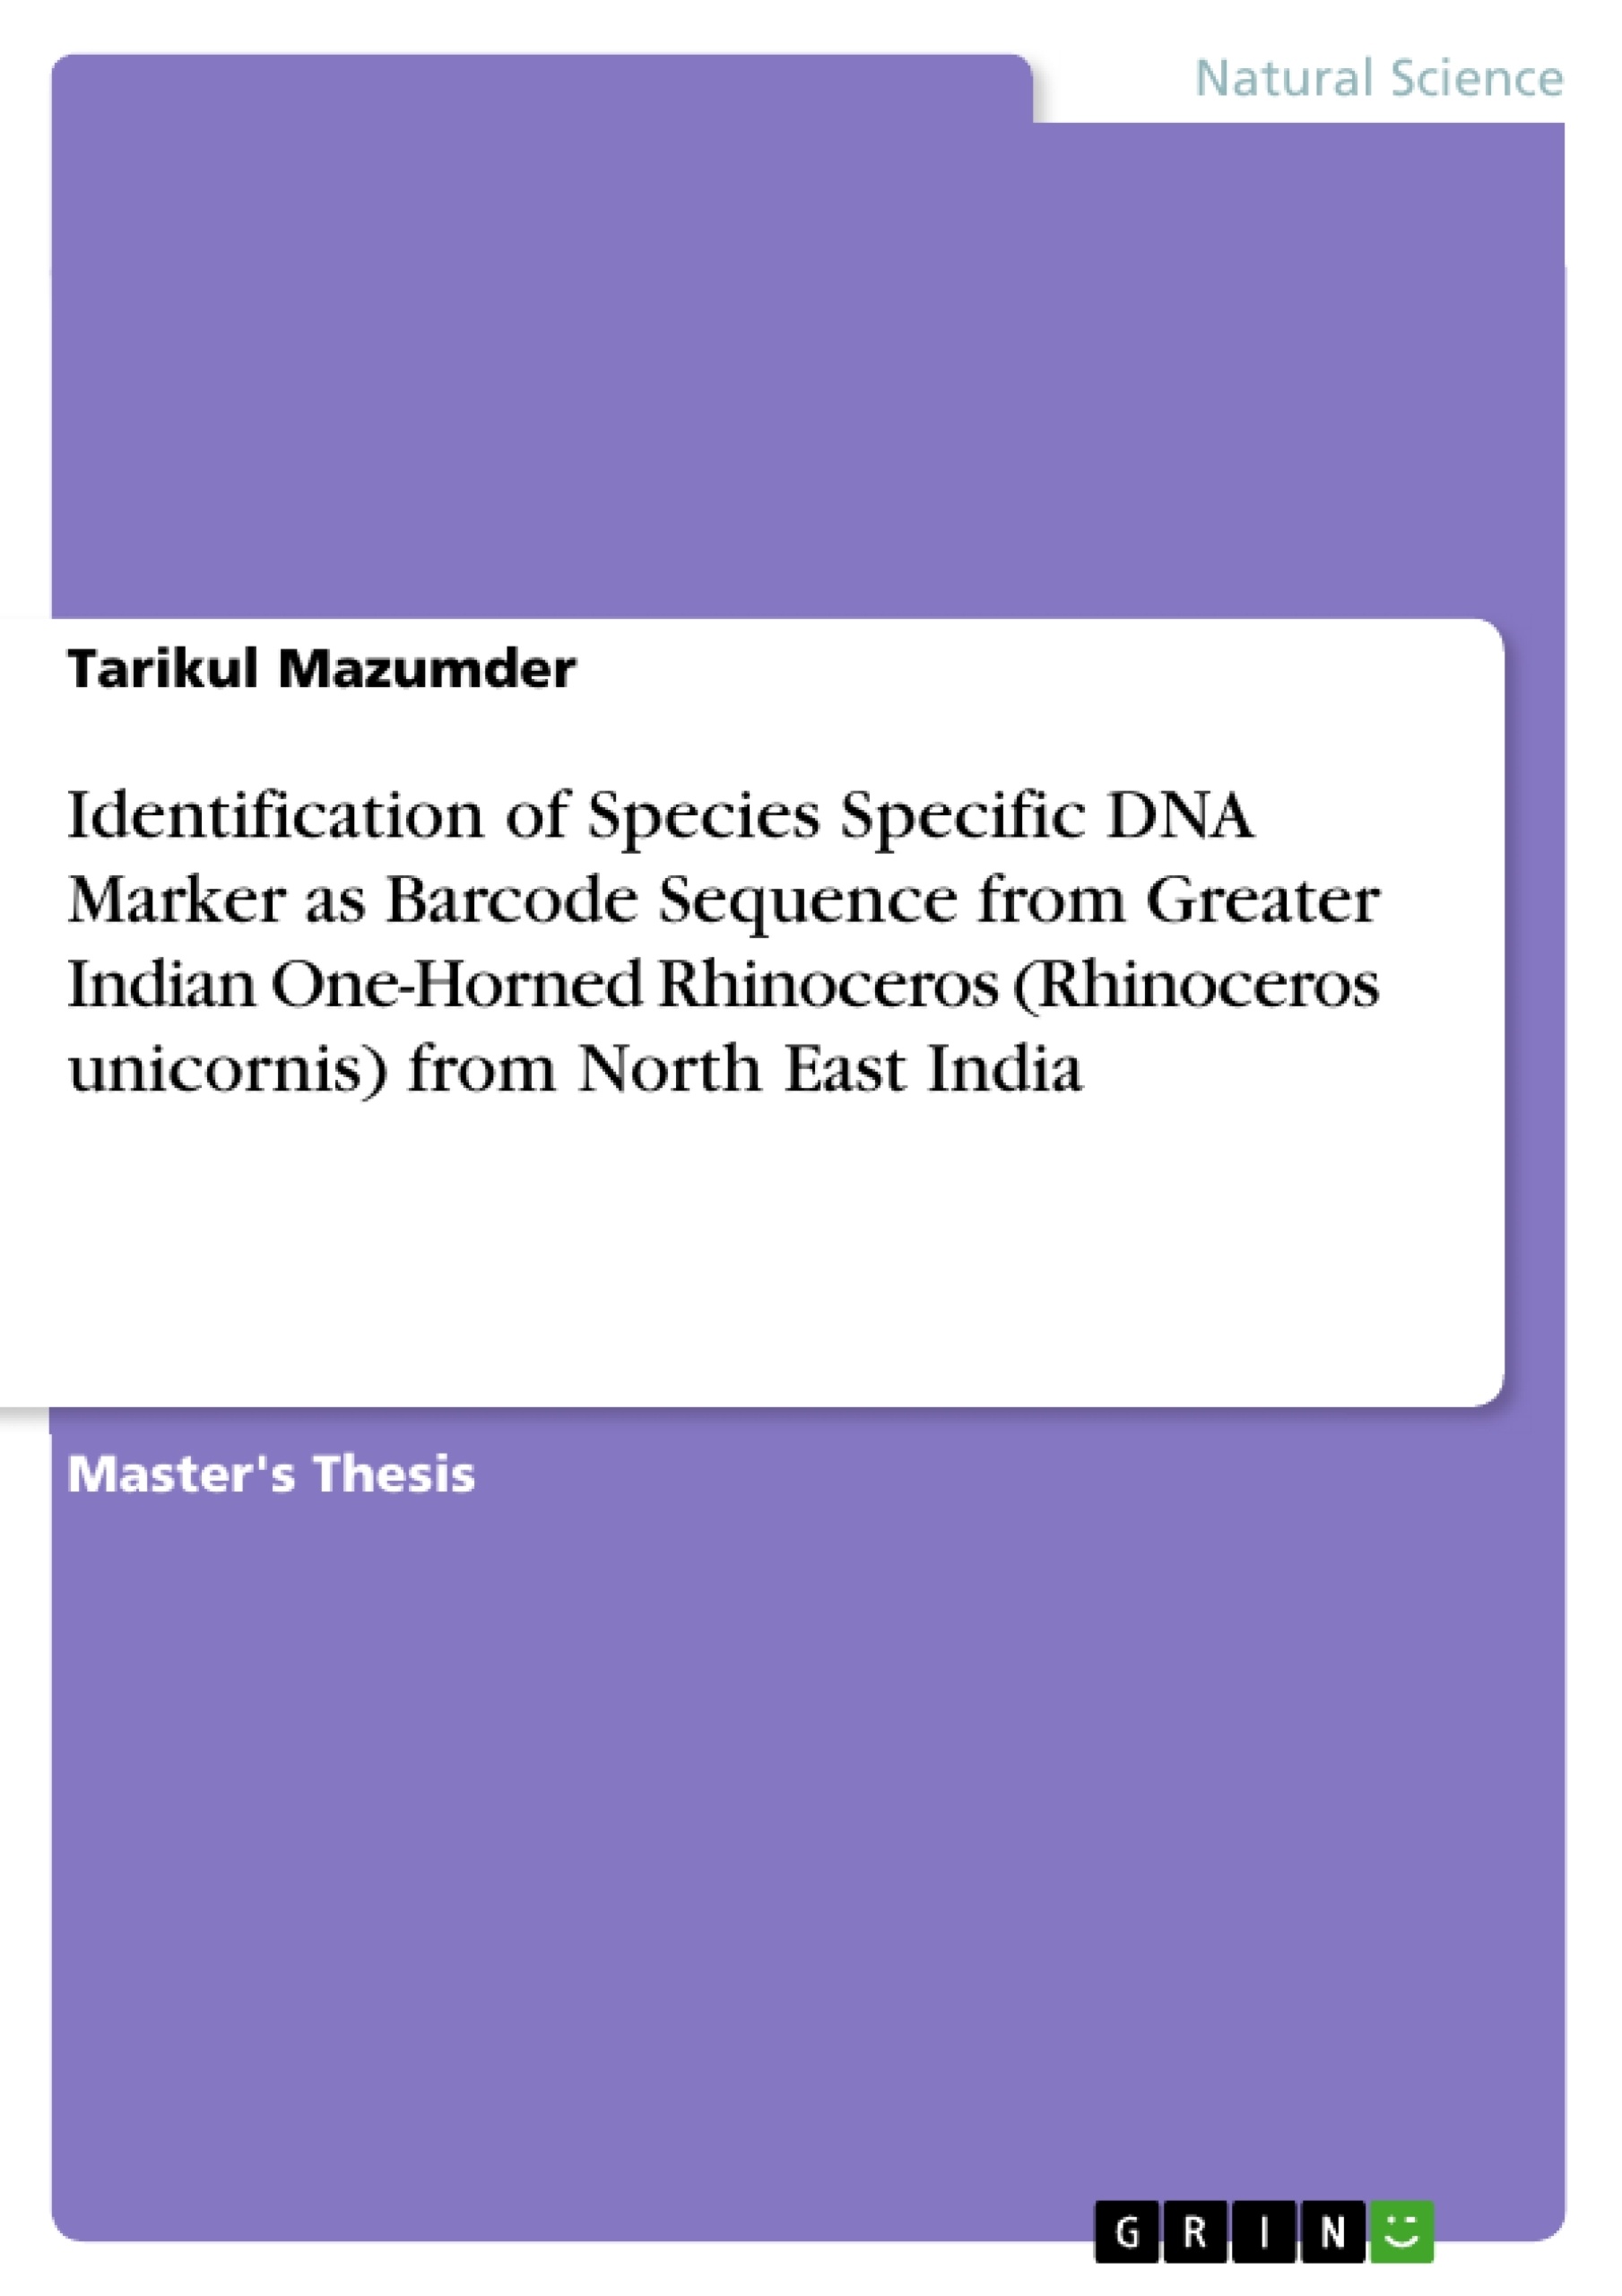 Título: Identification of Species Specific DNA Marker as Barcode Sequence from Greater Indian One-Horned Rhinoceros (Rhinoceros unicornis) from North East India